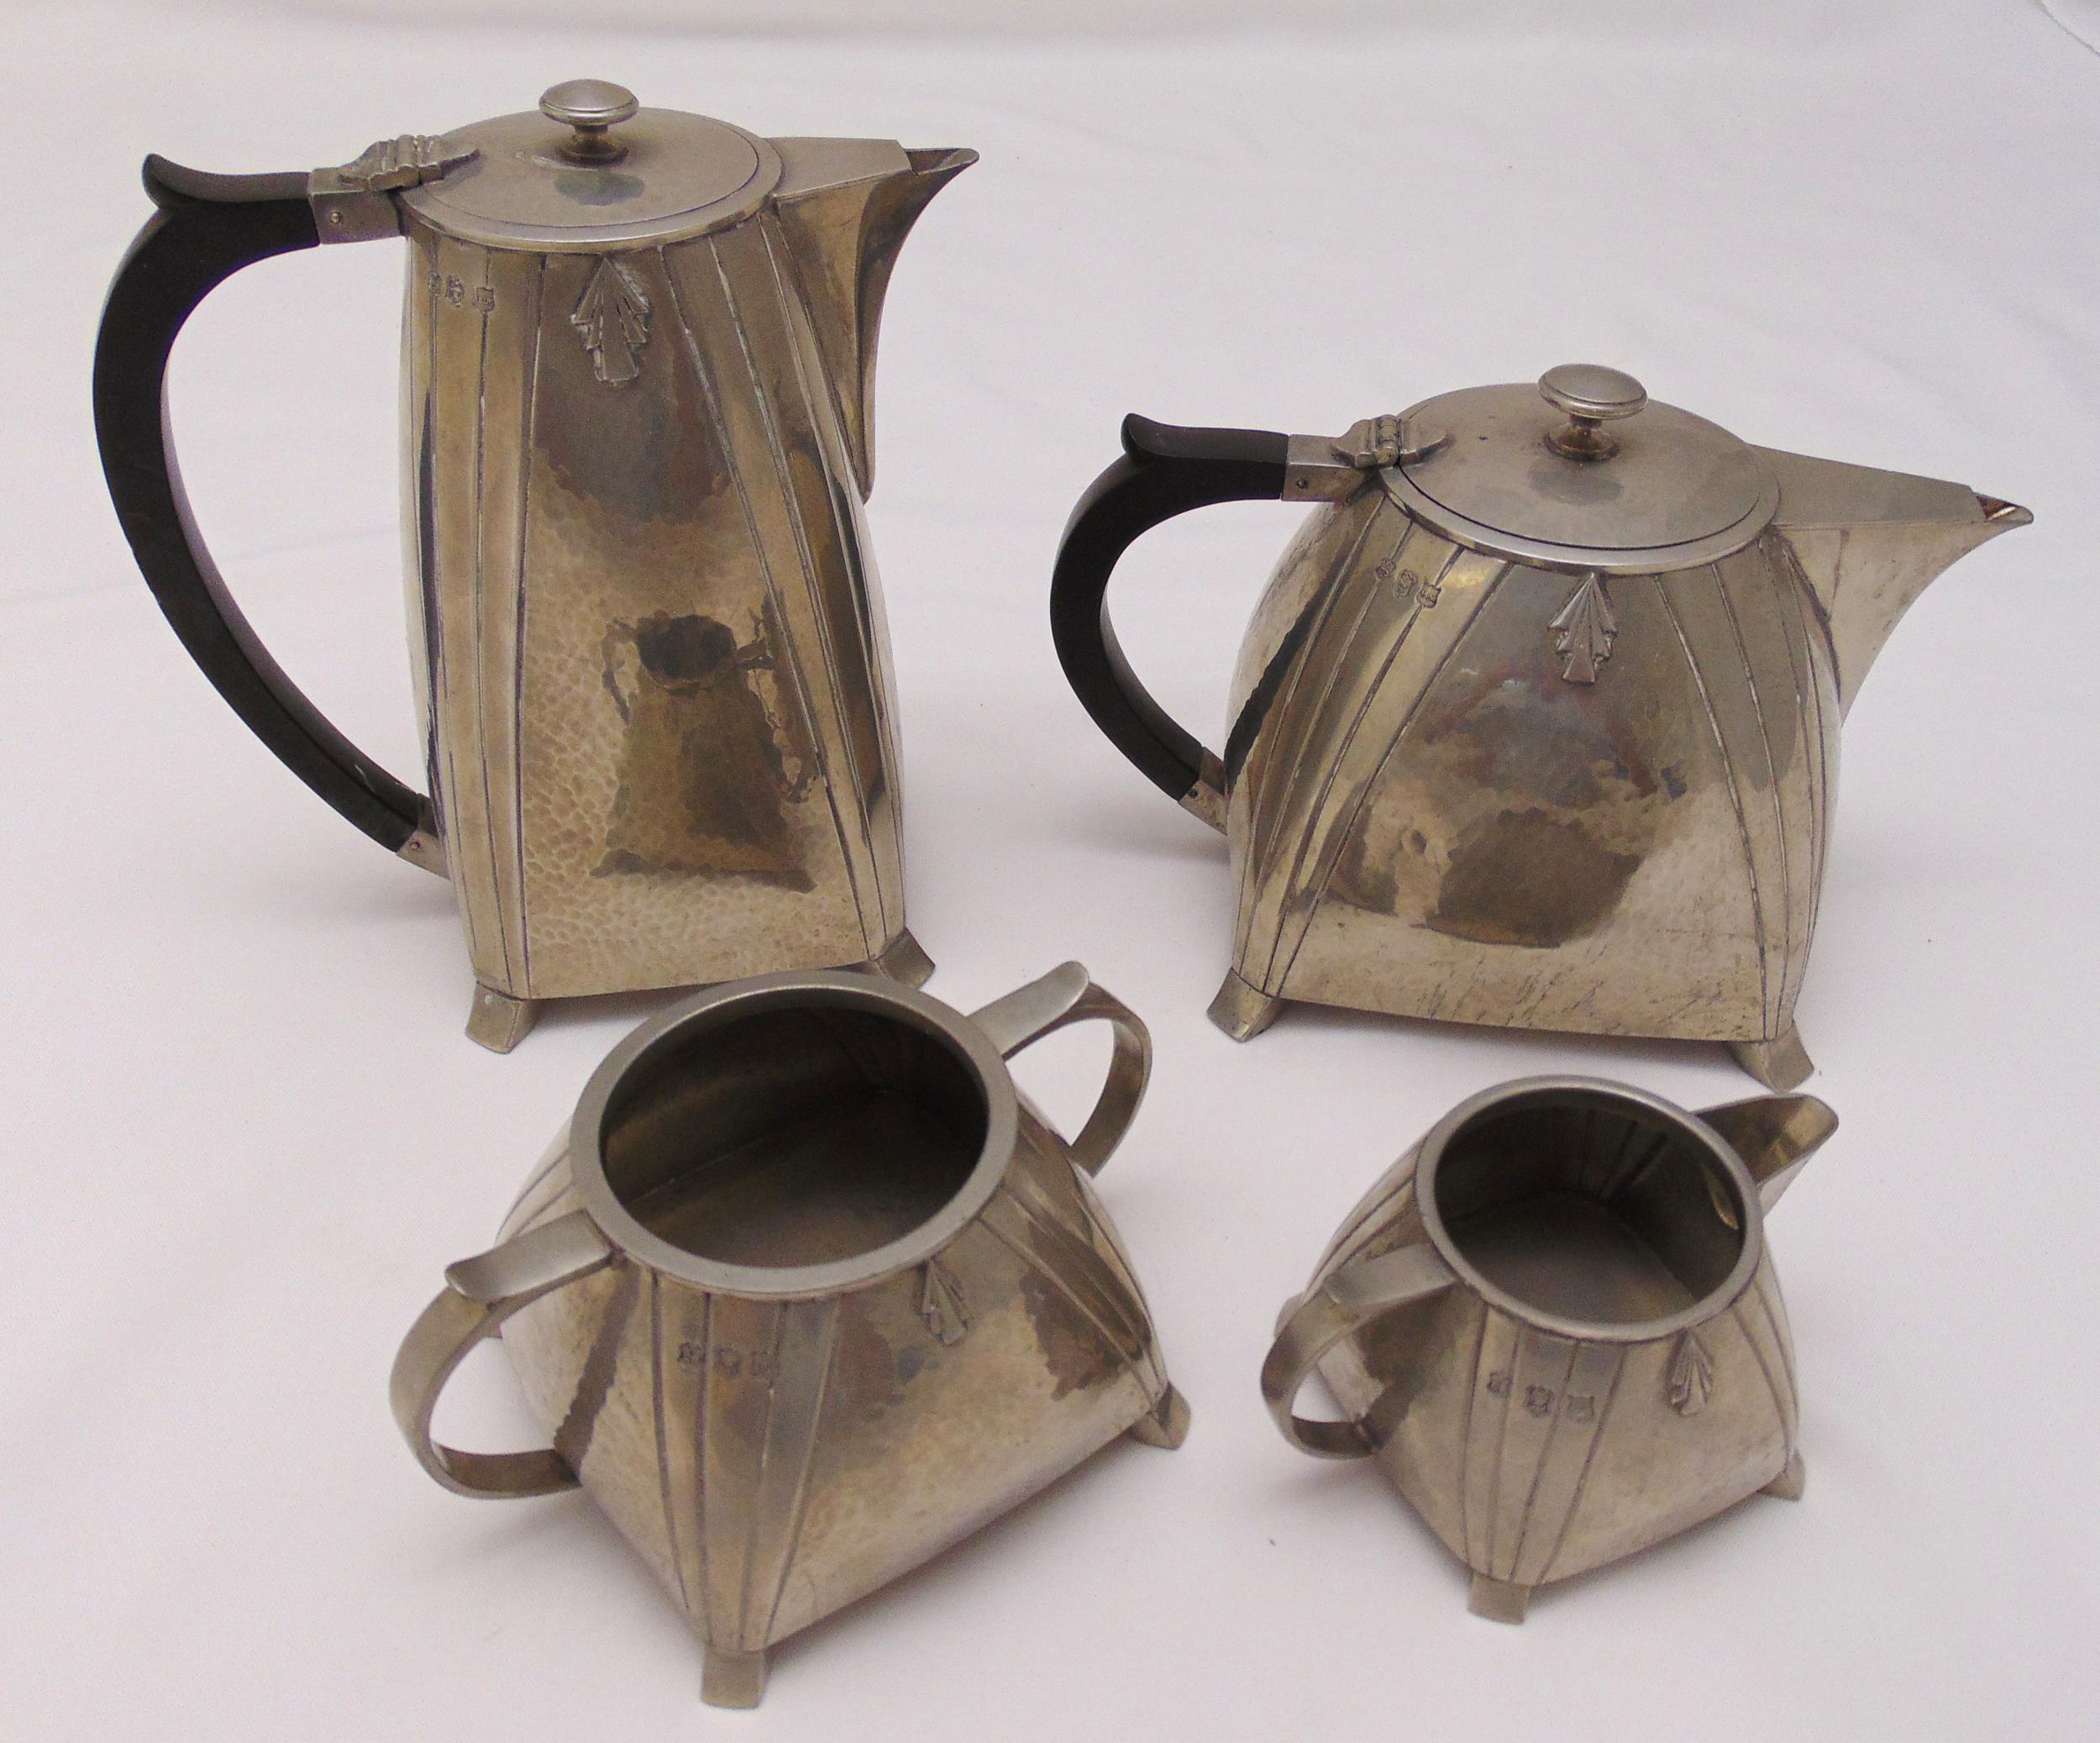 A hand hammered Arts and Crafts pewter teaset of tapering rectangular form with applied geometric